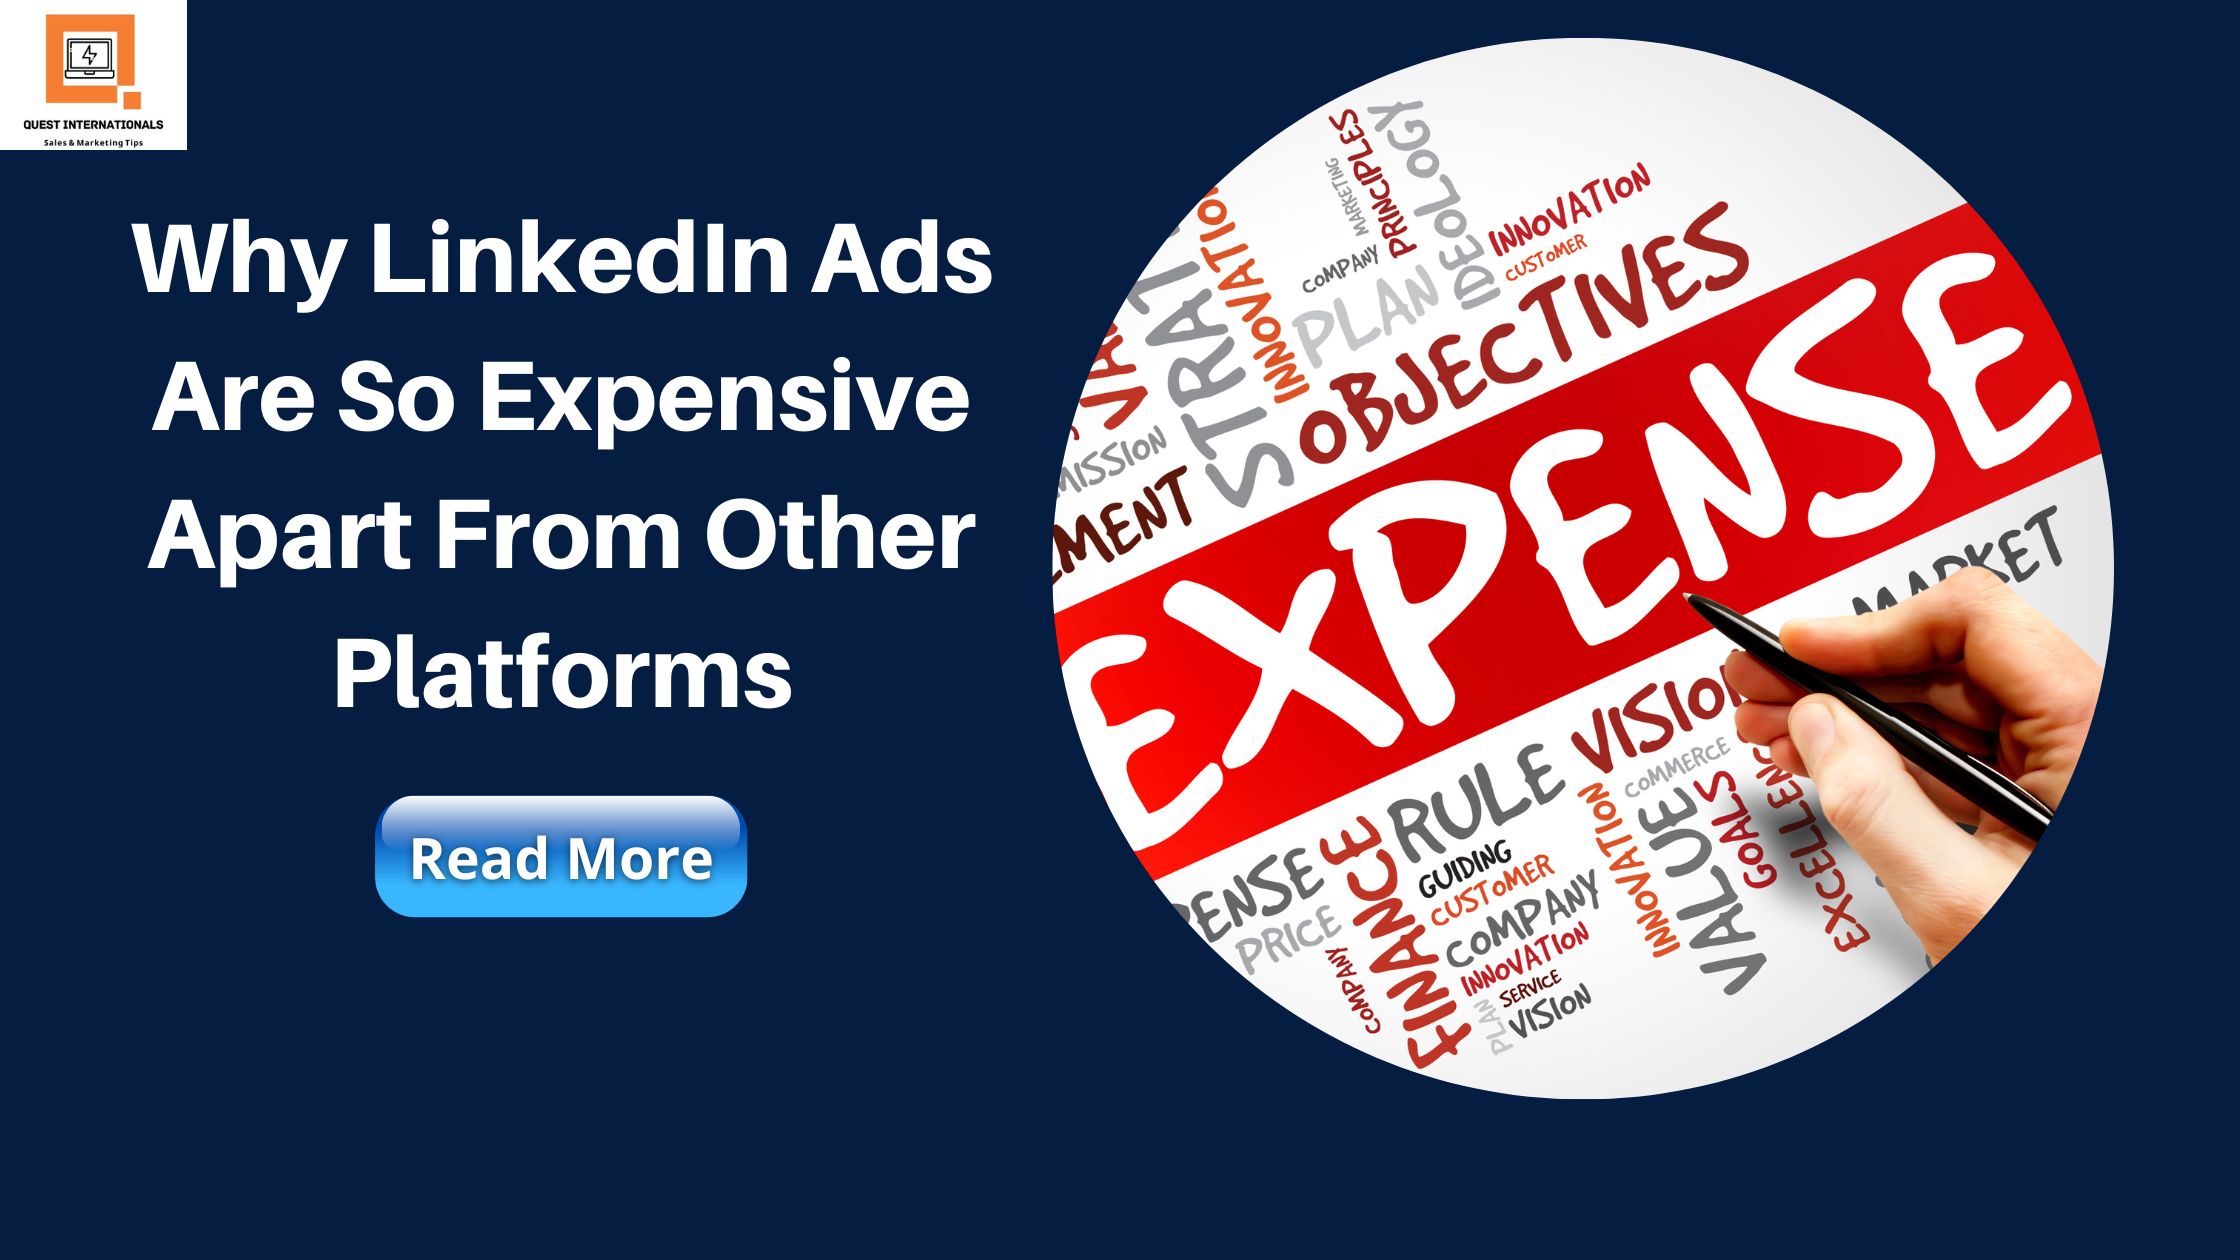 You are currently viewing Why LinkedIn Ads Are So Expensive Apart From Other Platforms